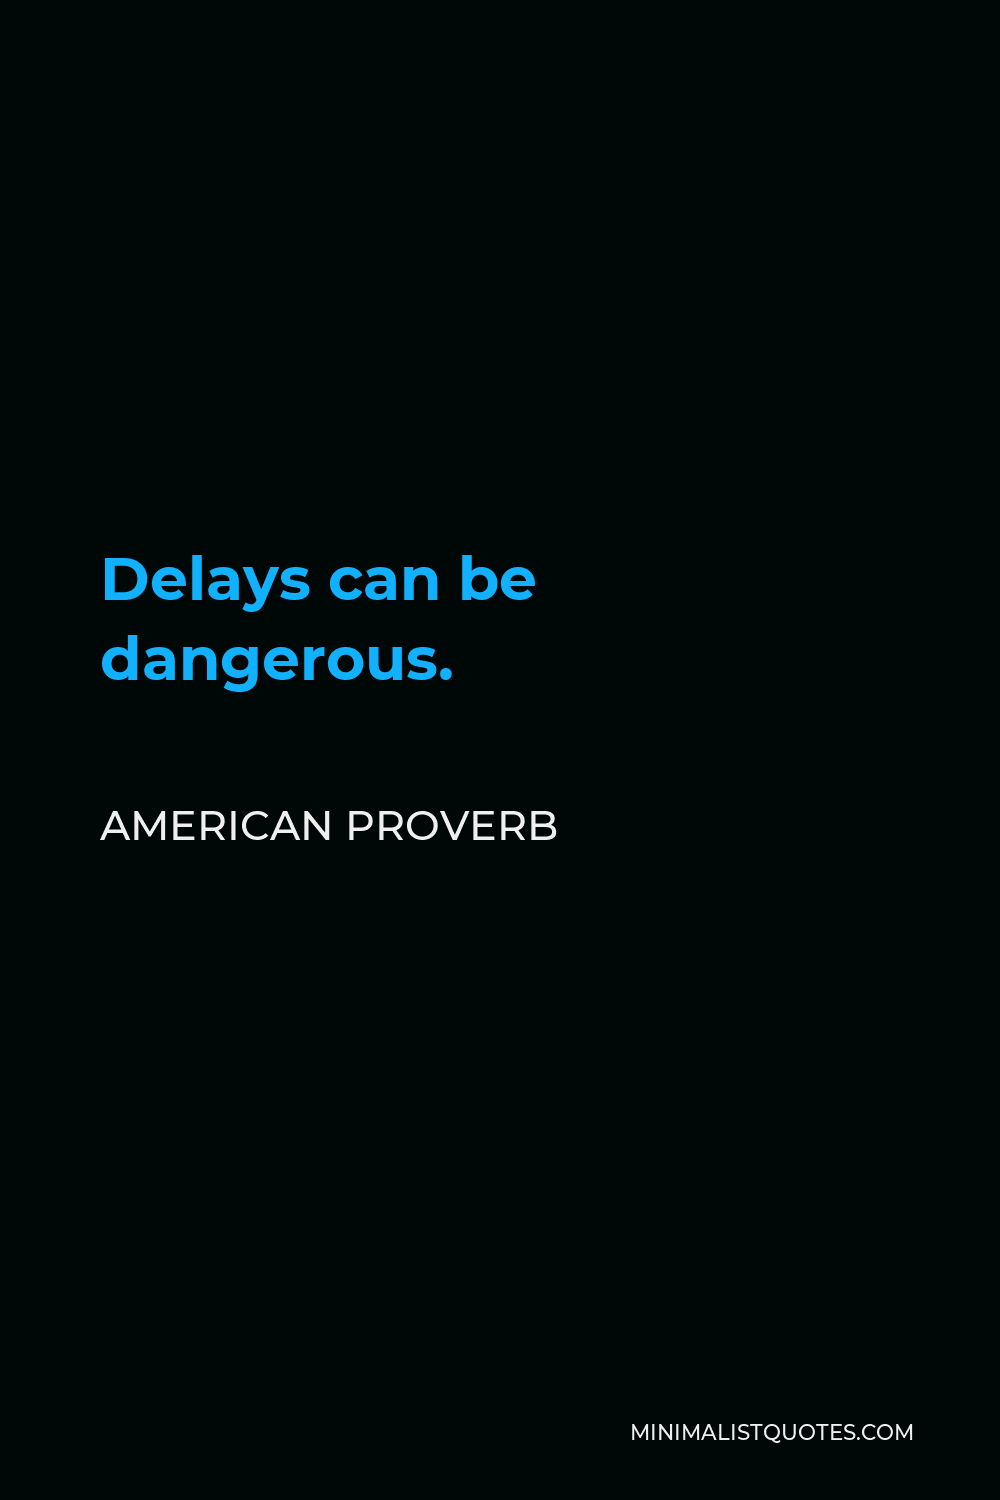 American Proverb Quote - Delays can be dangerous.